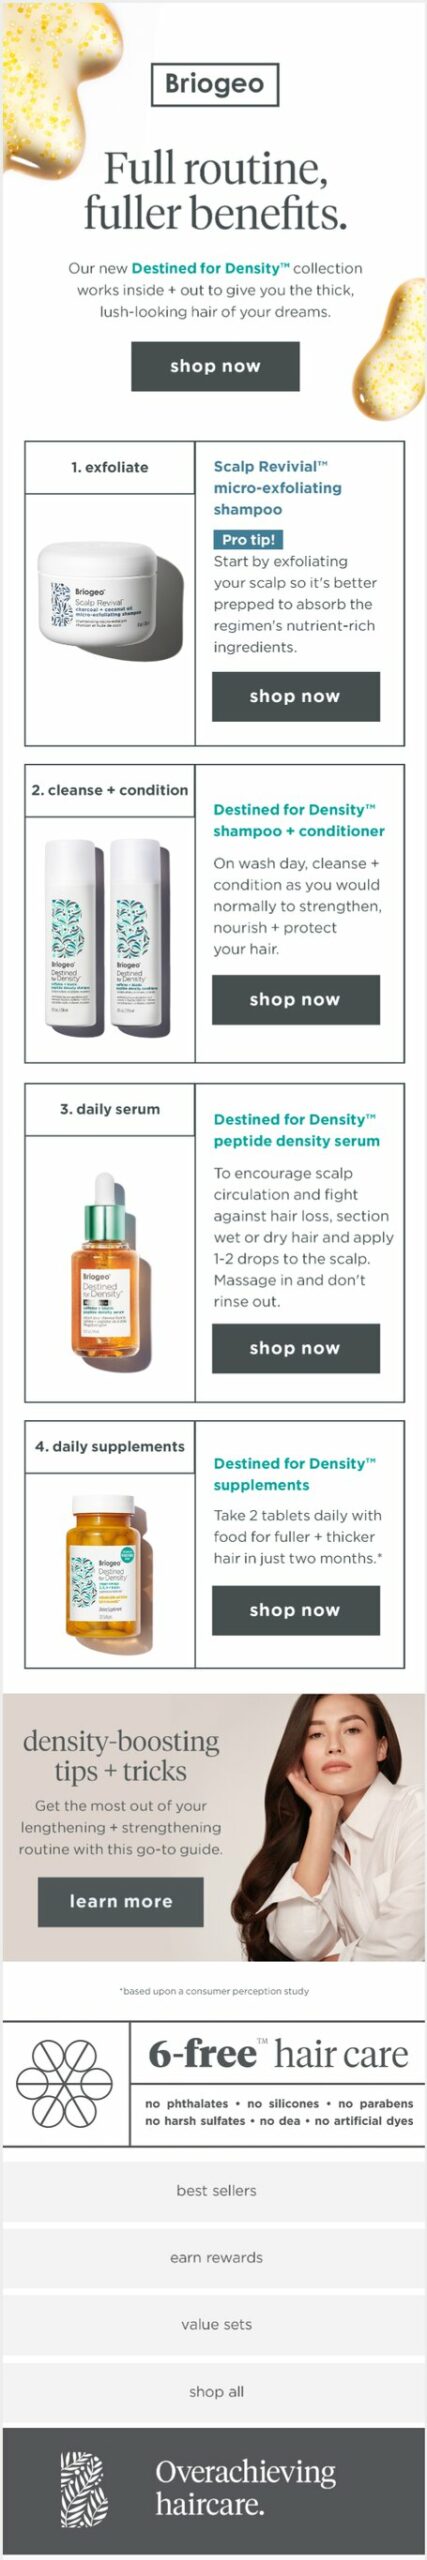 Haircare sample promotions